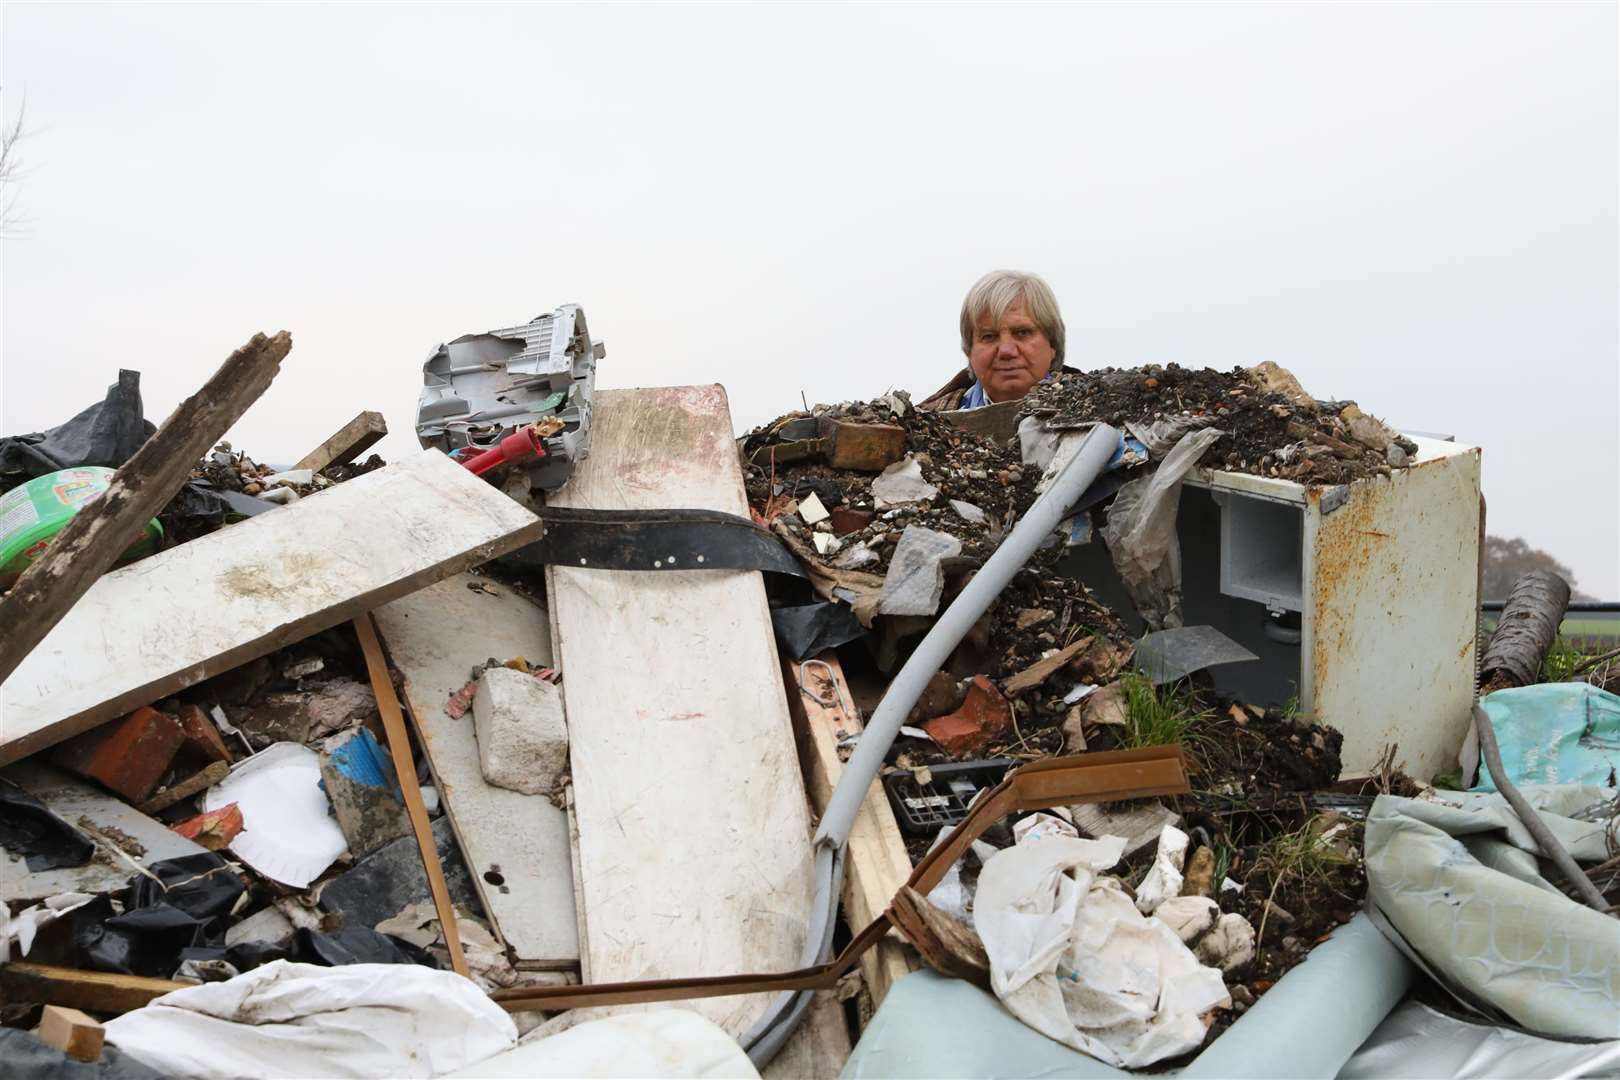 Lester Gosbee behind the pile of fly-tipped builder's rubble